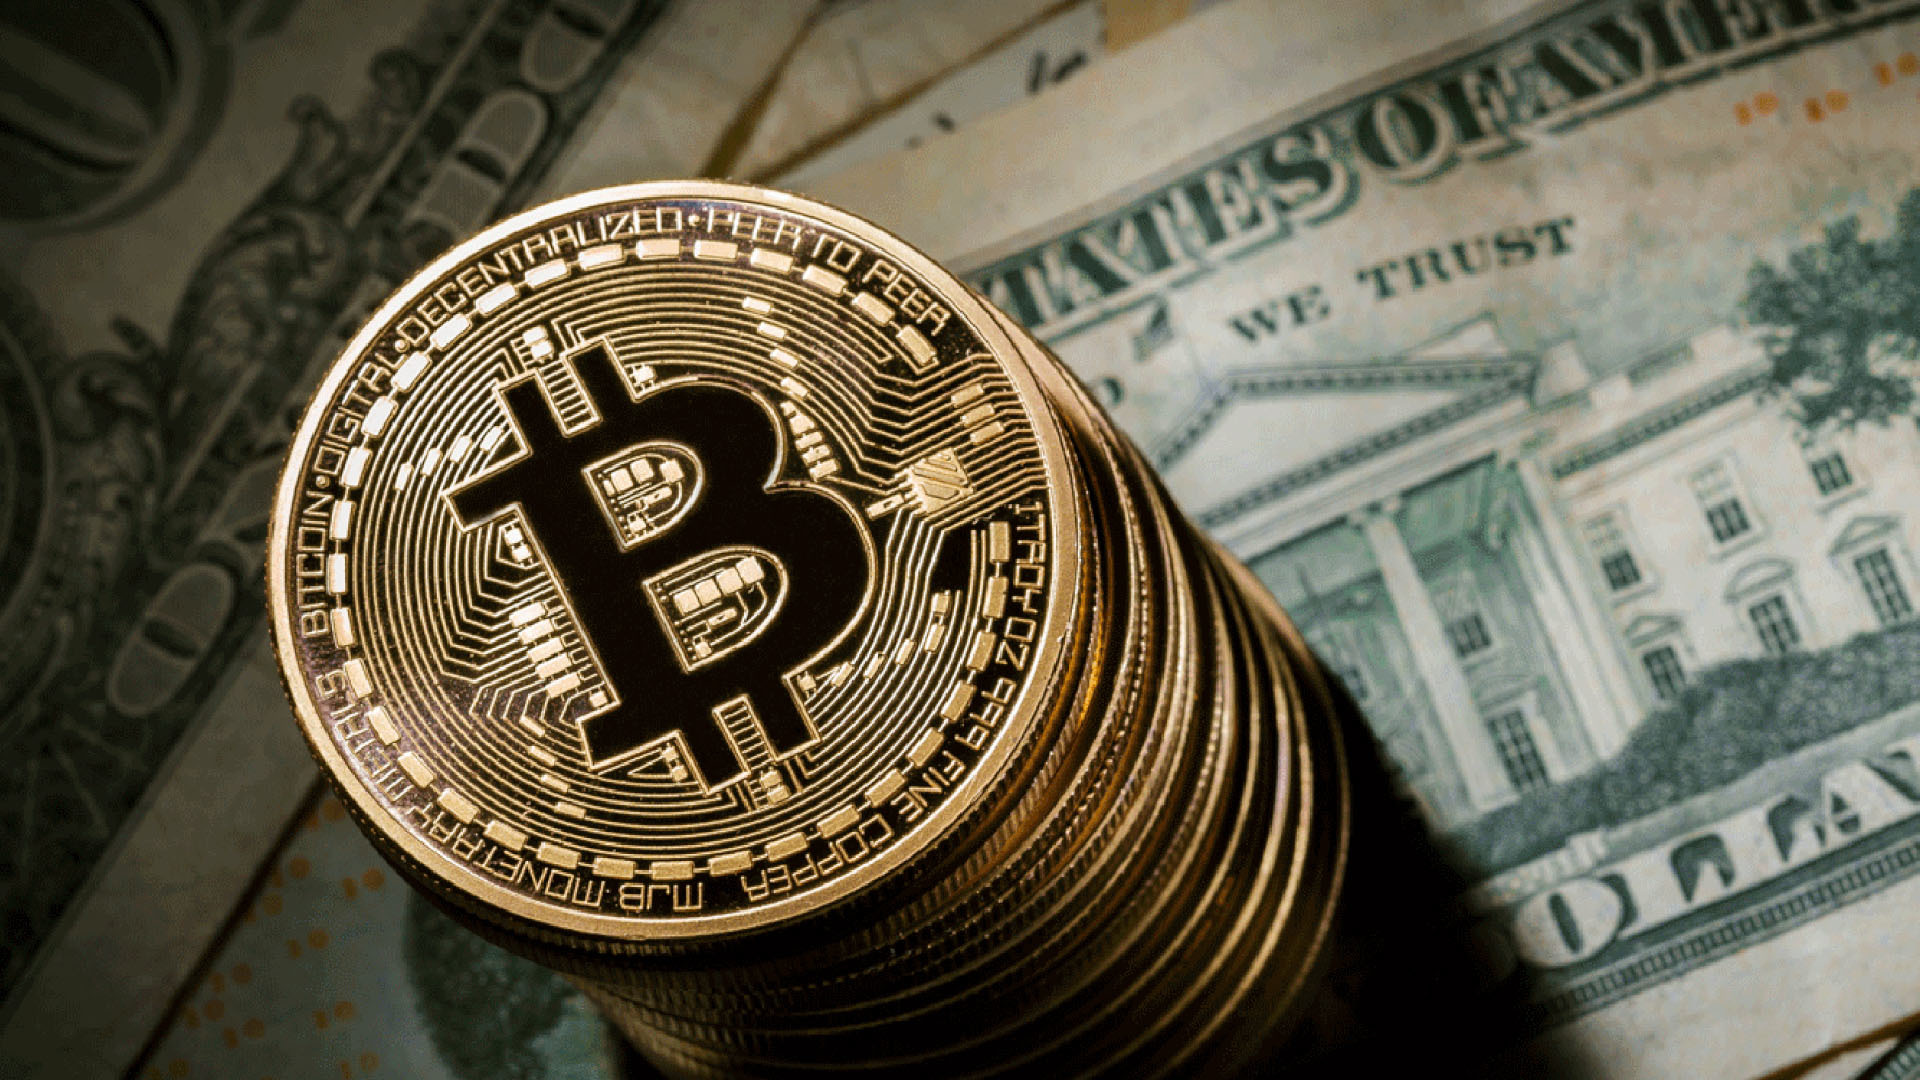 Sunday long read an overview of the currency crisis and what role bitcoin plays